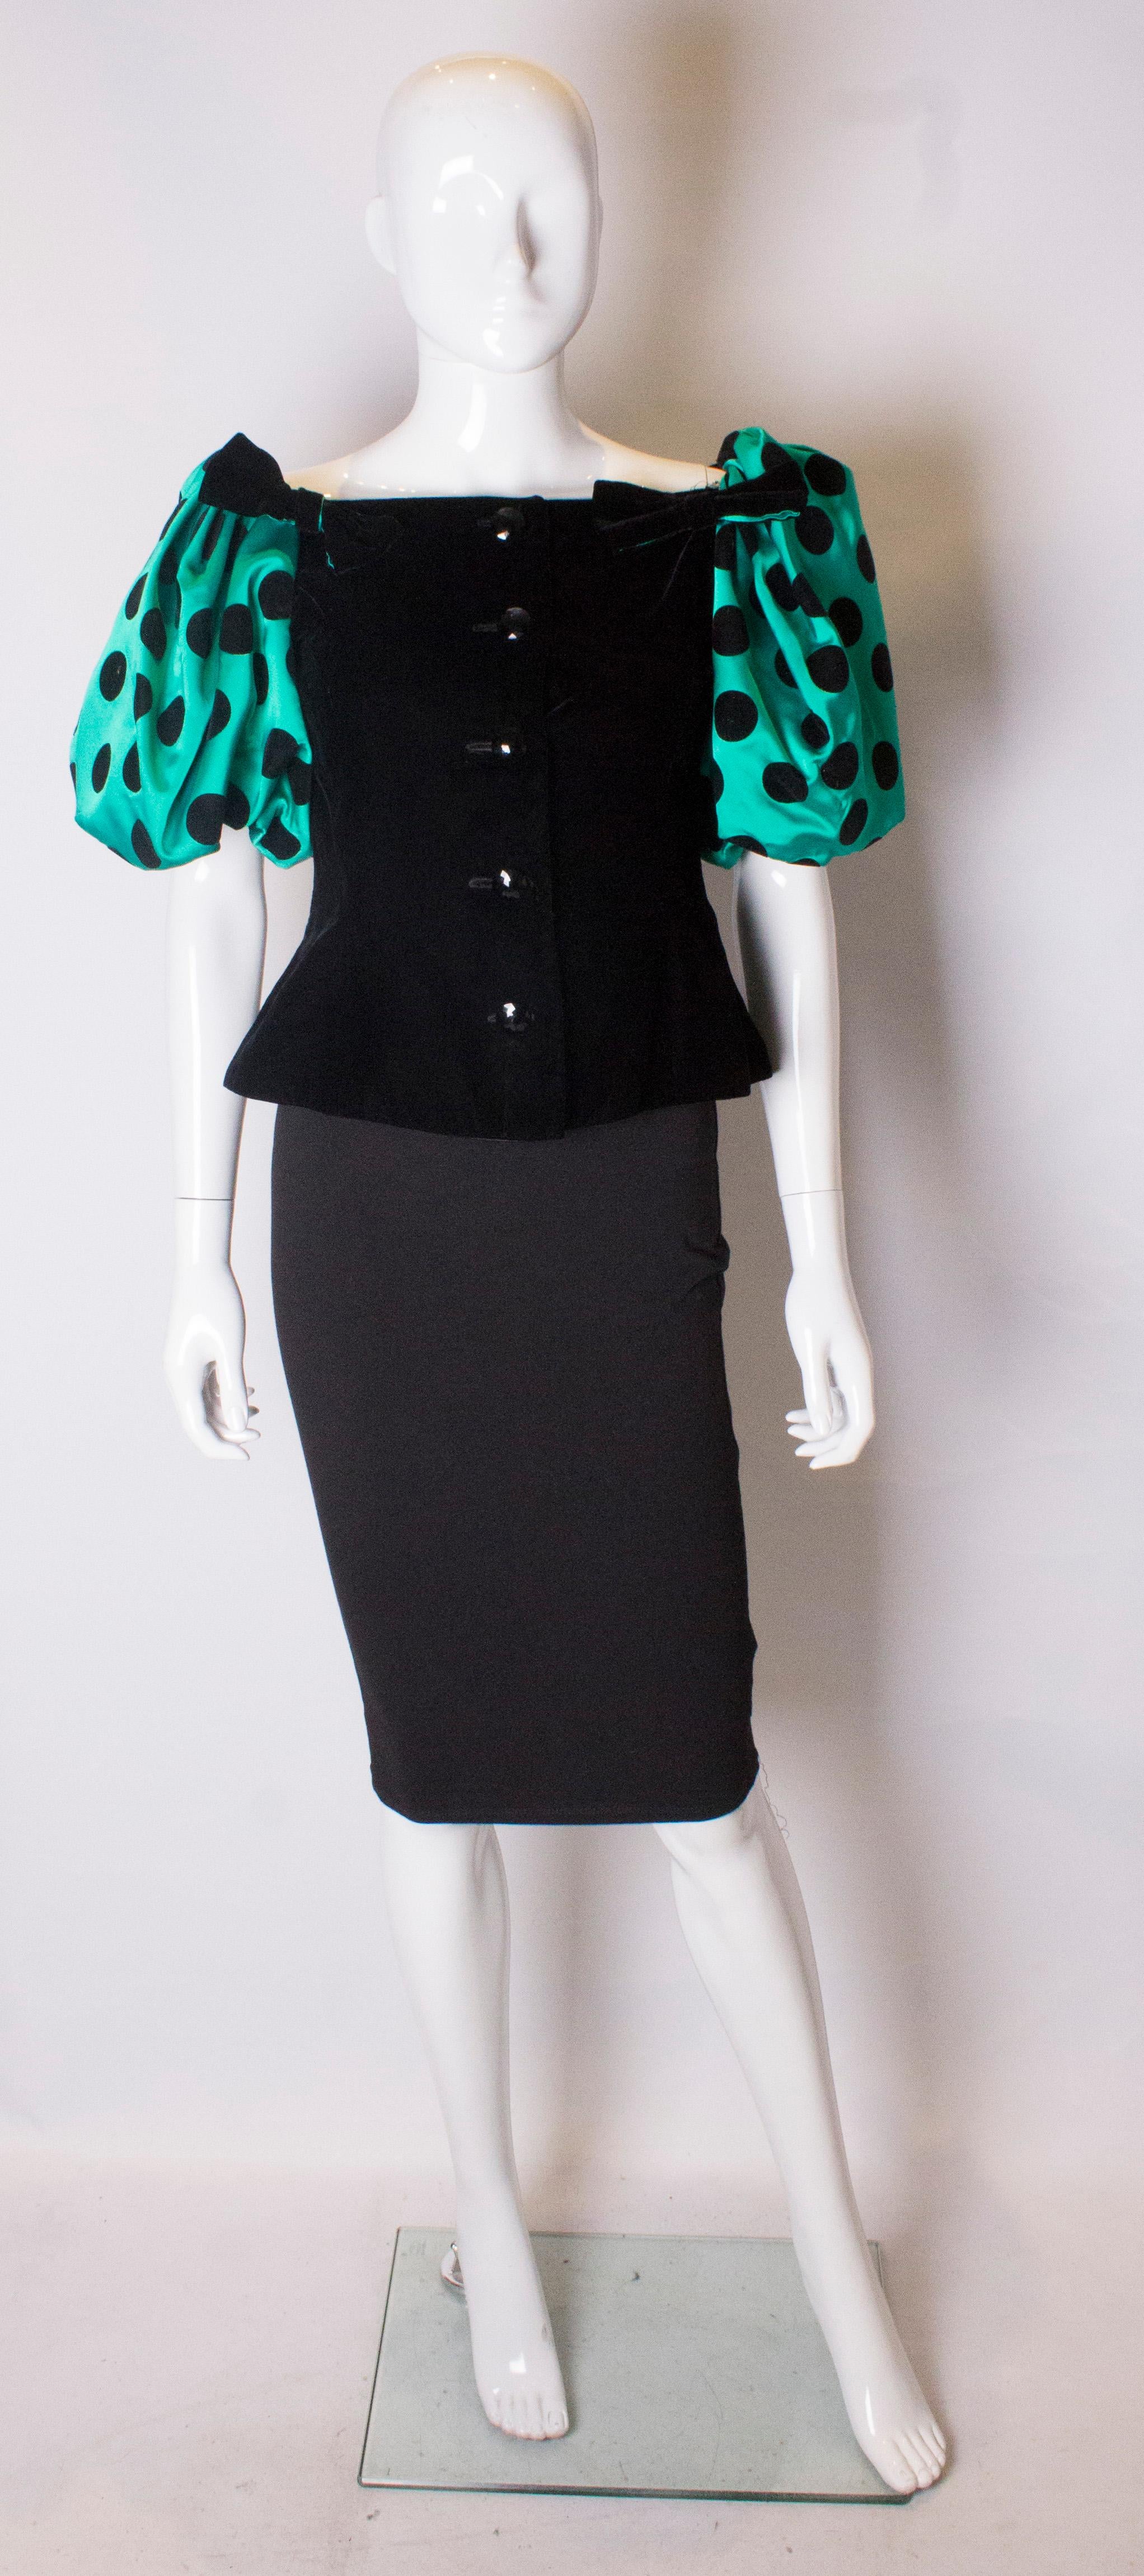 A great vintage top by Hardy Amies. The top has a black velvet central body and is fully lined, with button opening at the front and a vent at the back.The sleeves are puff green with black spots.